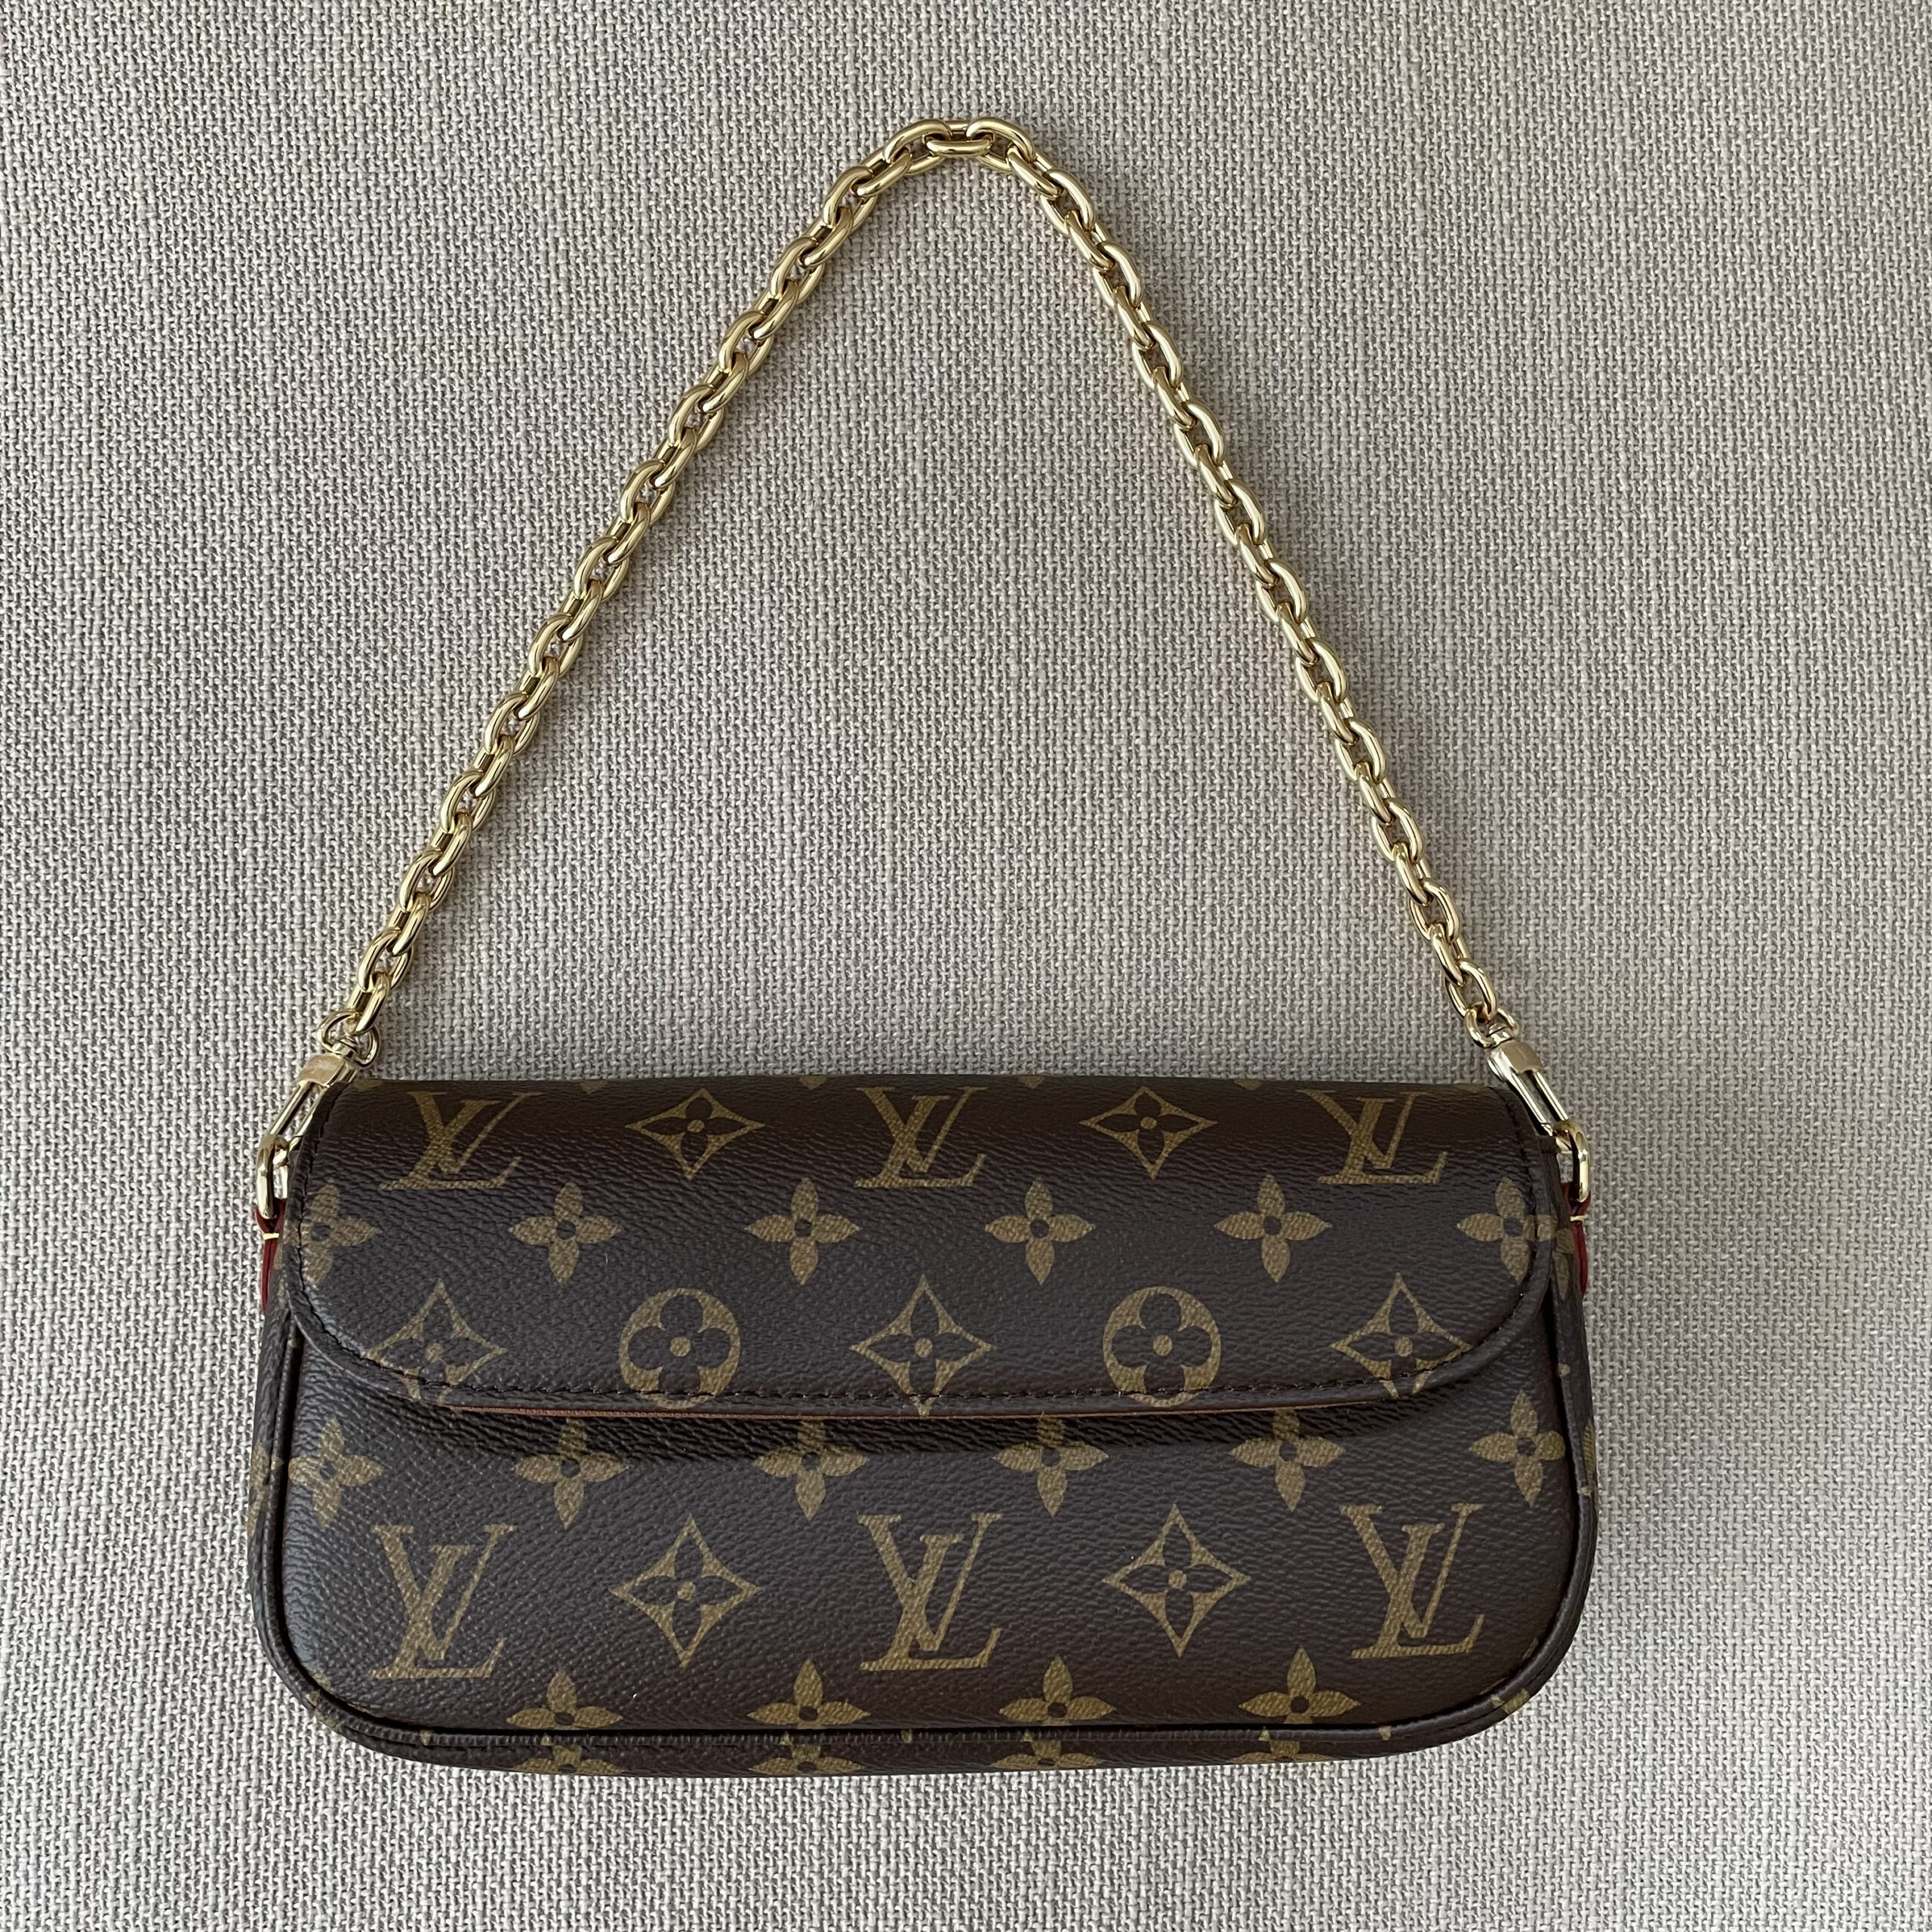 THE MOST ANNOYING PART OF IT  LV IVY WALLET ON CHAIN REVIEW  YouTube